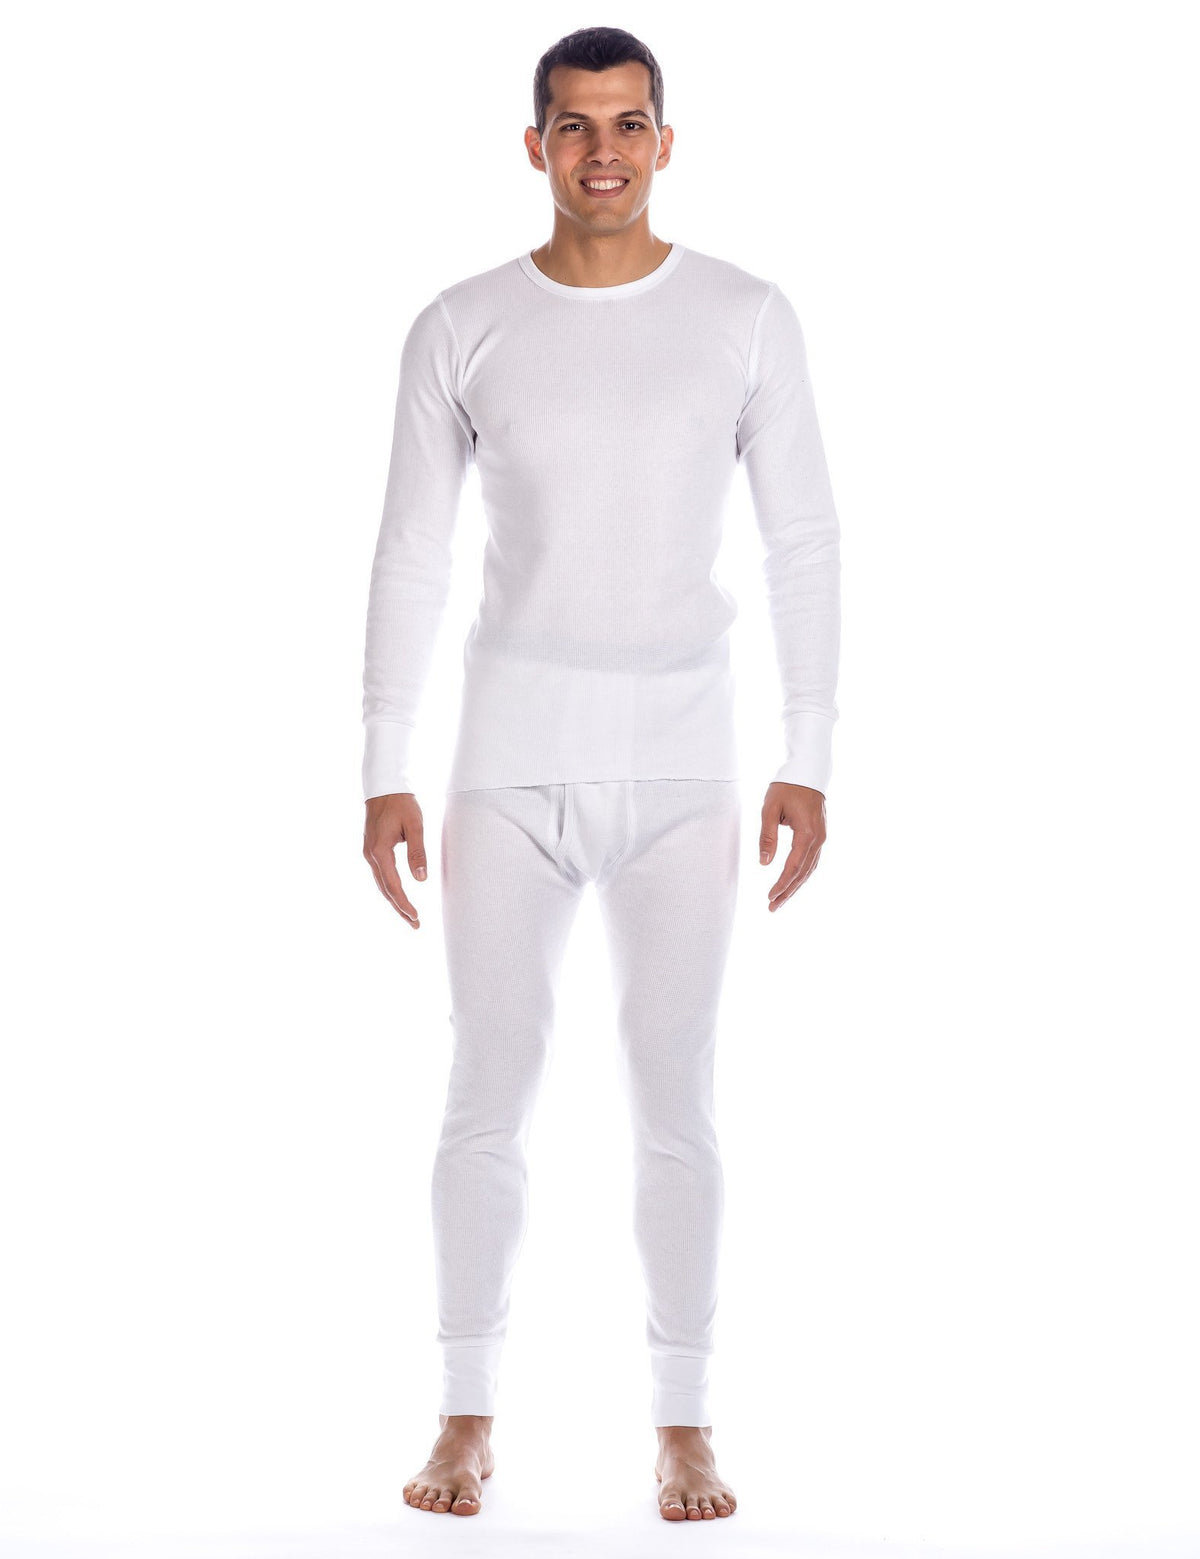 Men's Classic Waffle Knit Thermal Top and Bottom Set - White